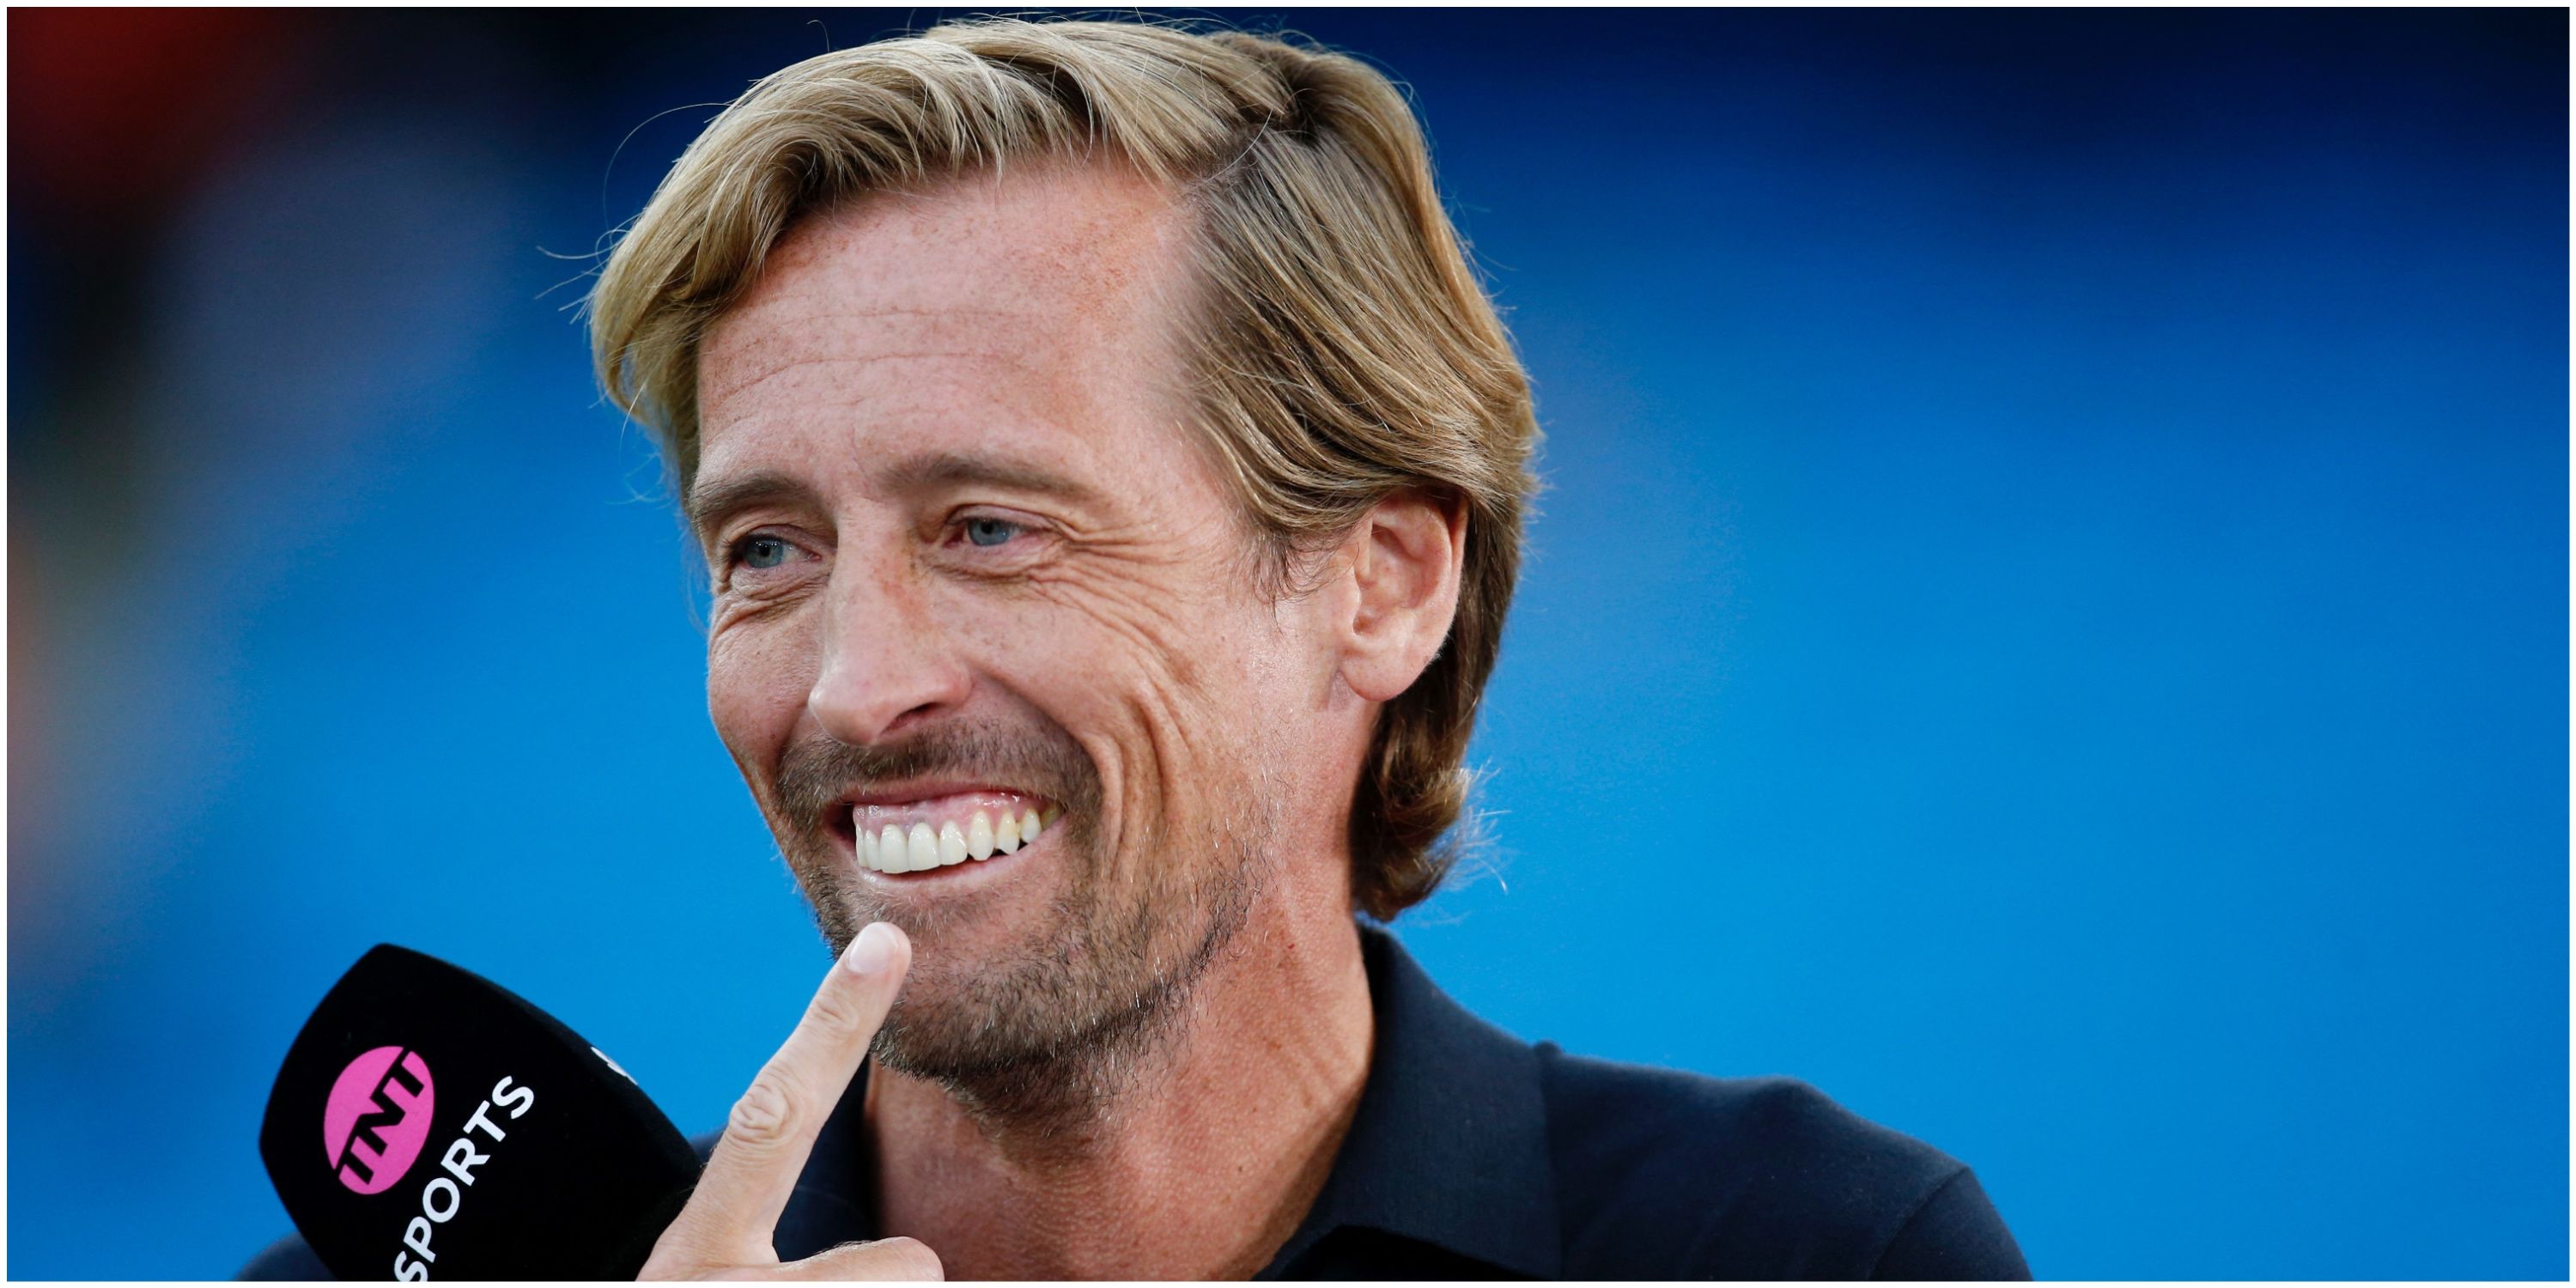 ‘Don’t know If I should say this’ - Peter Crouch’s controversial view on Messi vs Ronaldo debate